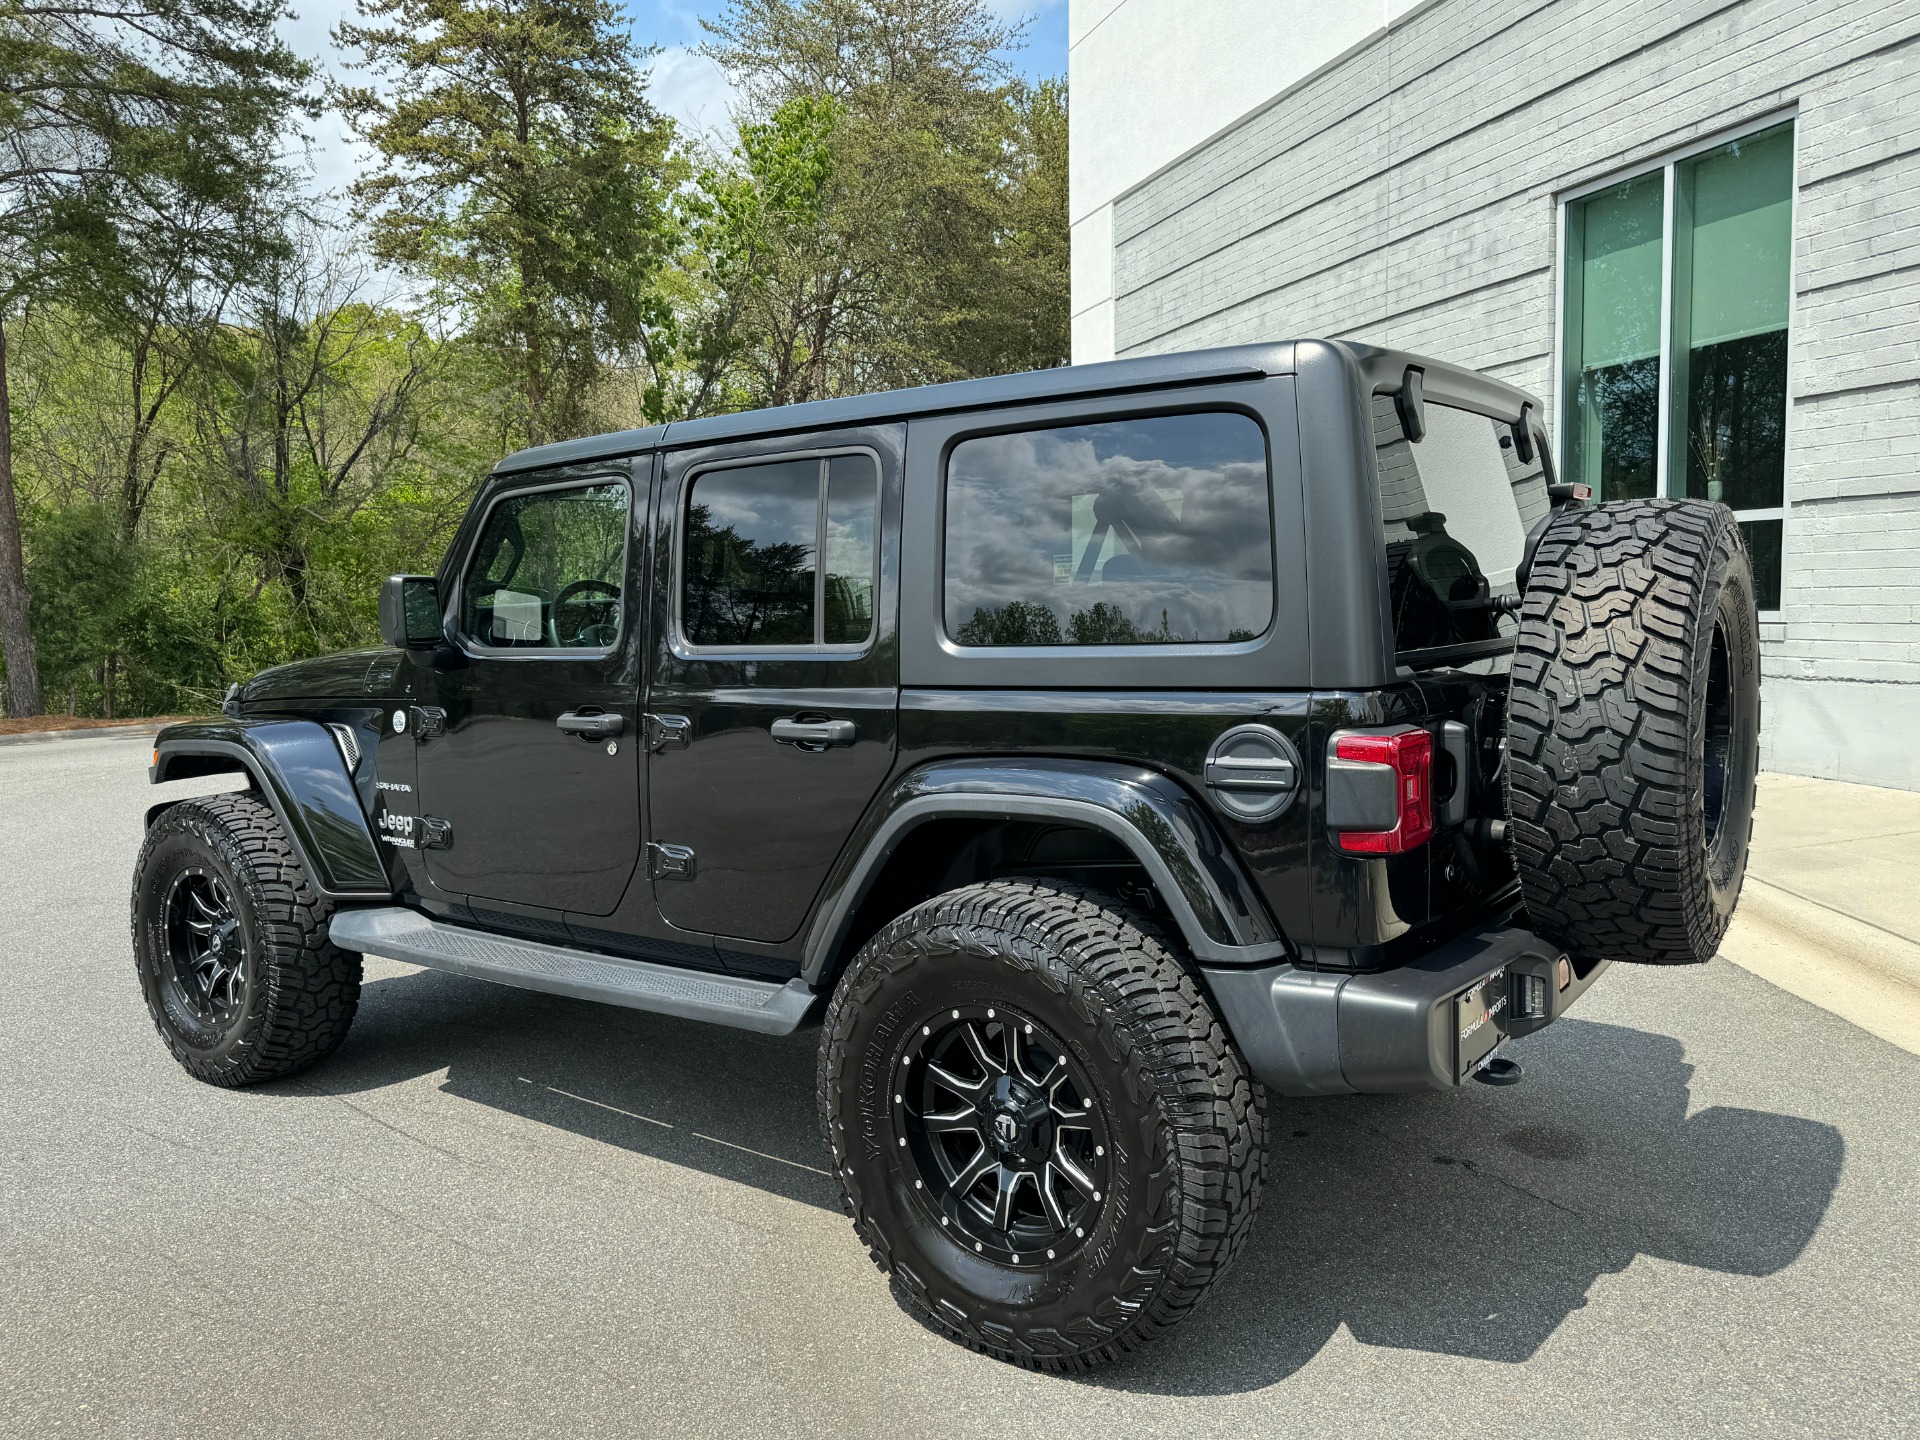 Used 2018 Jeep WRANGLER UNLIMITED SAHARA 4X4 / MANUAL / NAV / ALPINE / FREEDOM TOP / REARVIEW for sale Sold at Formula Imports in Charlotte NC 28227 8